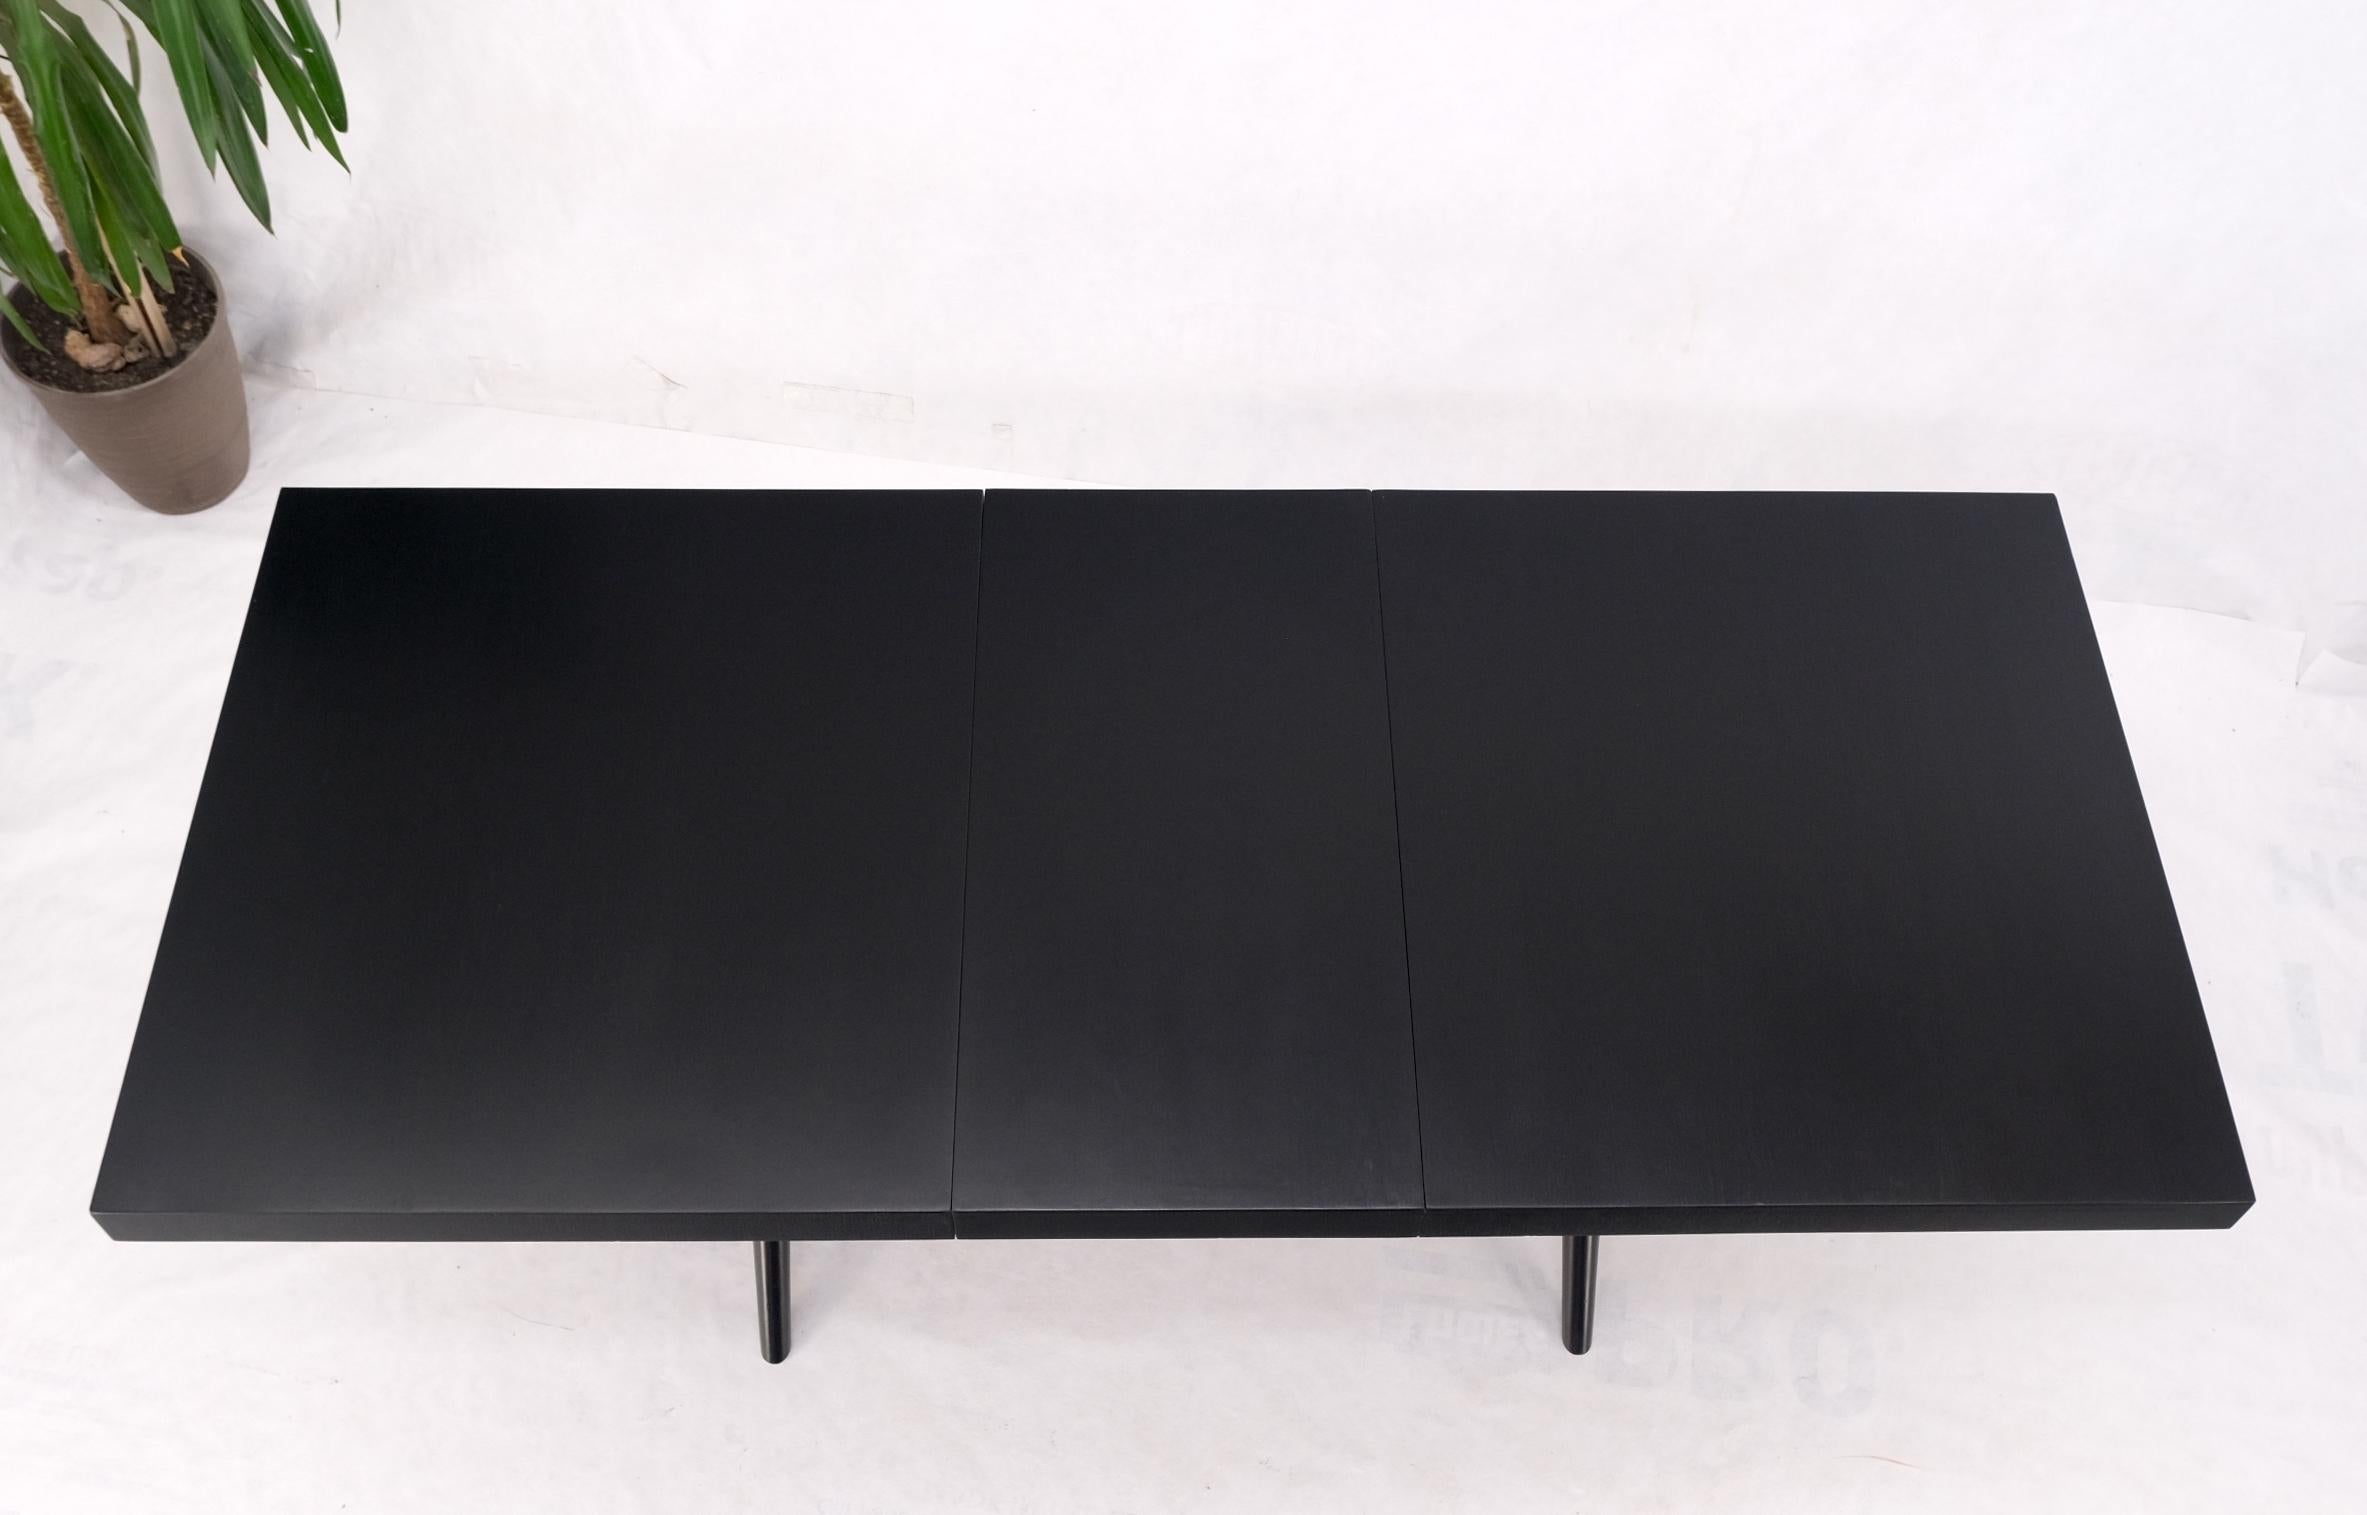 Black Lacquer One Leaf X Base Gibbings Trestle Dining Table by Widdicomb Mint For Sale 8